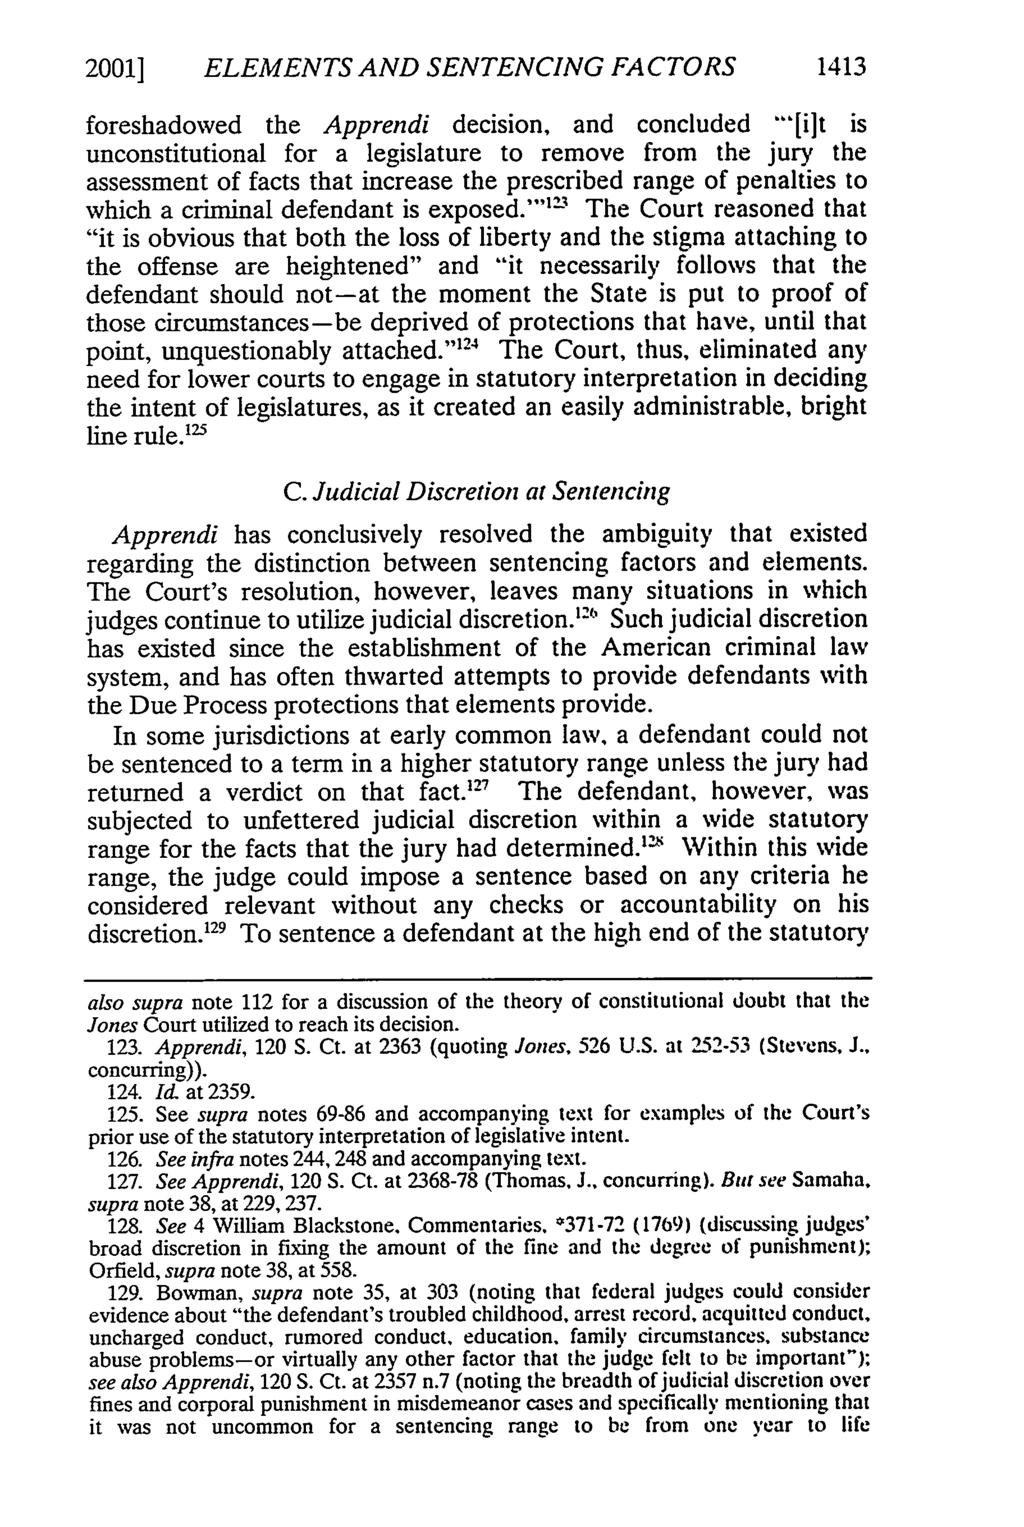 2001] ELEMENTS AND SENTENCING FACTORS 1413 foreshadowed the Apprendi decision, and concluded "[ilt is unconstitutional for a legislature to remove from the jury the assessment of facts that increase